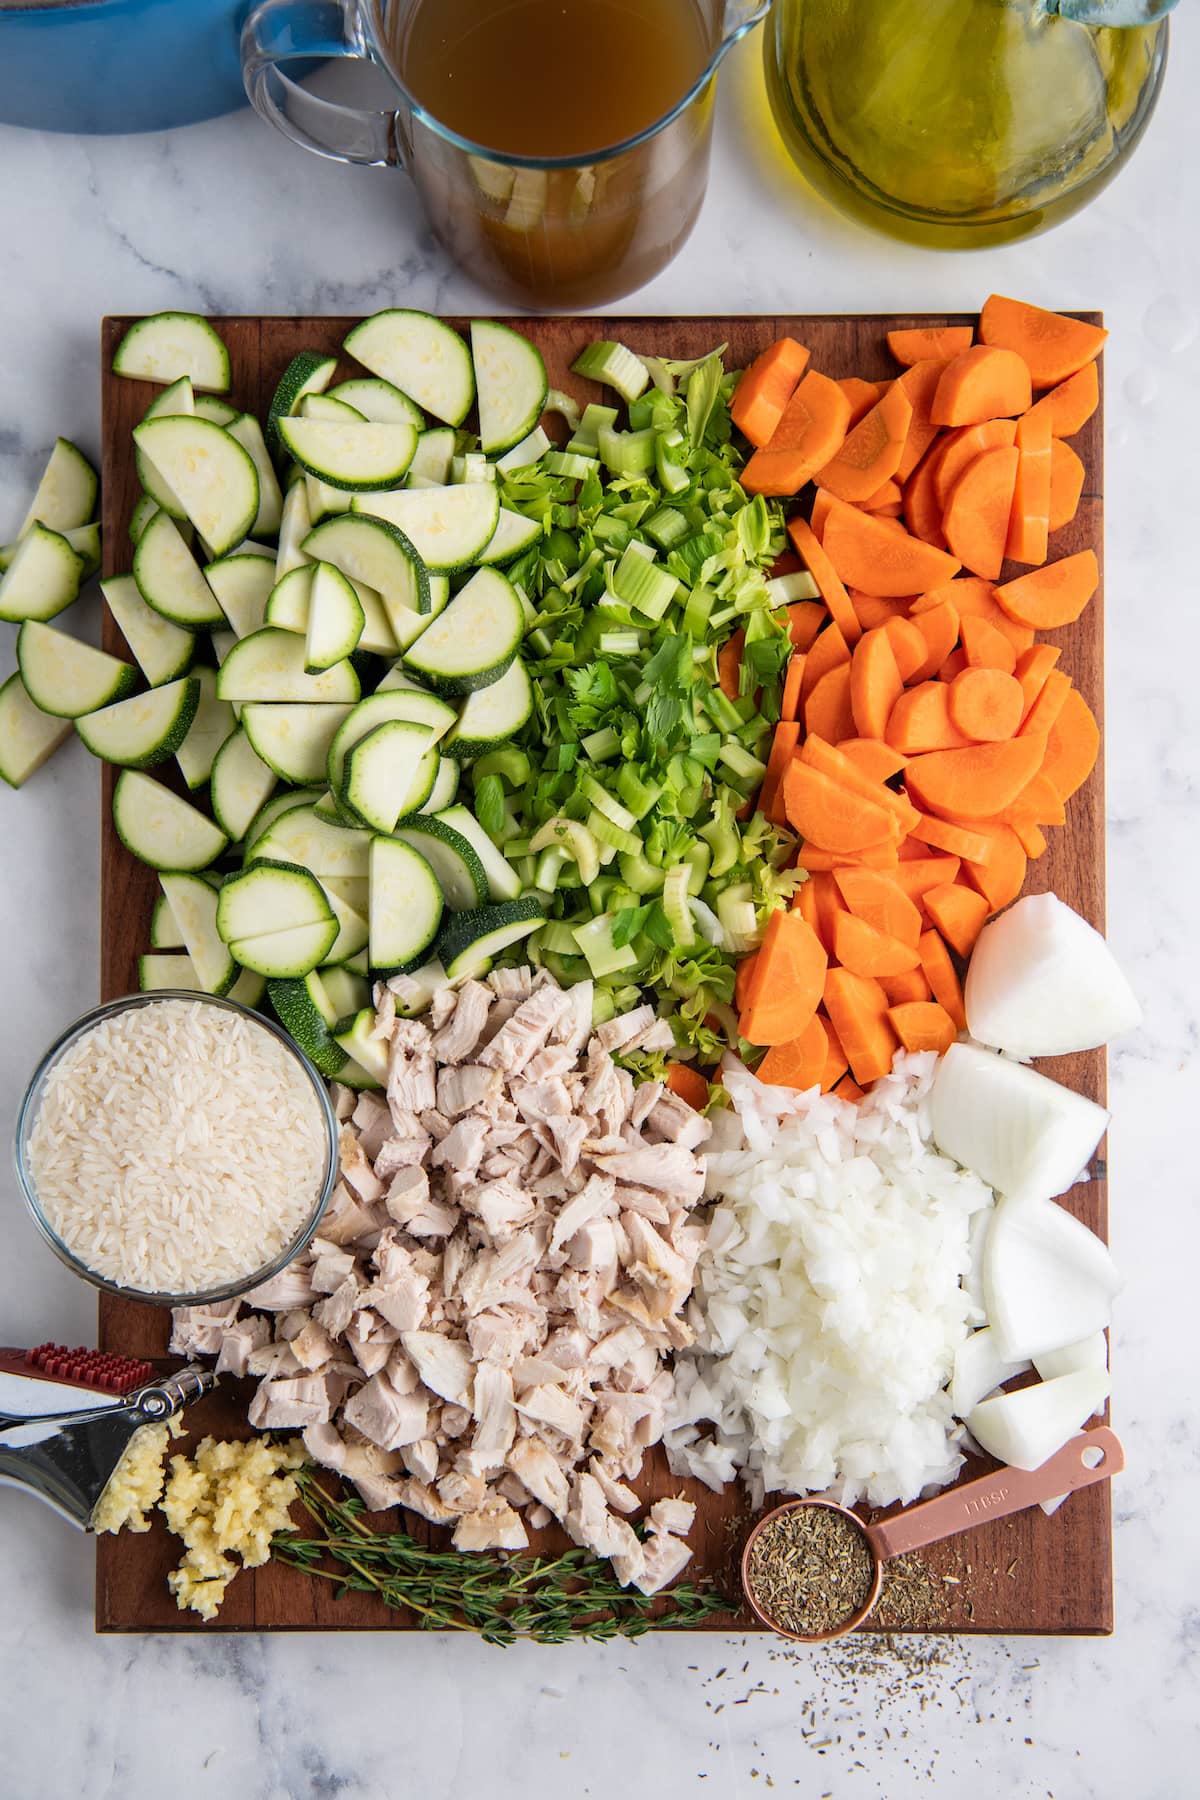 a cutting board with cut up vegetables, chicken, and other ingredients being put together to make soup